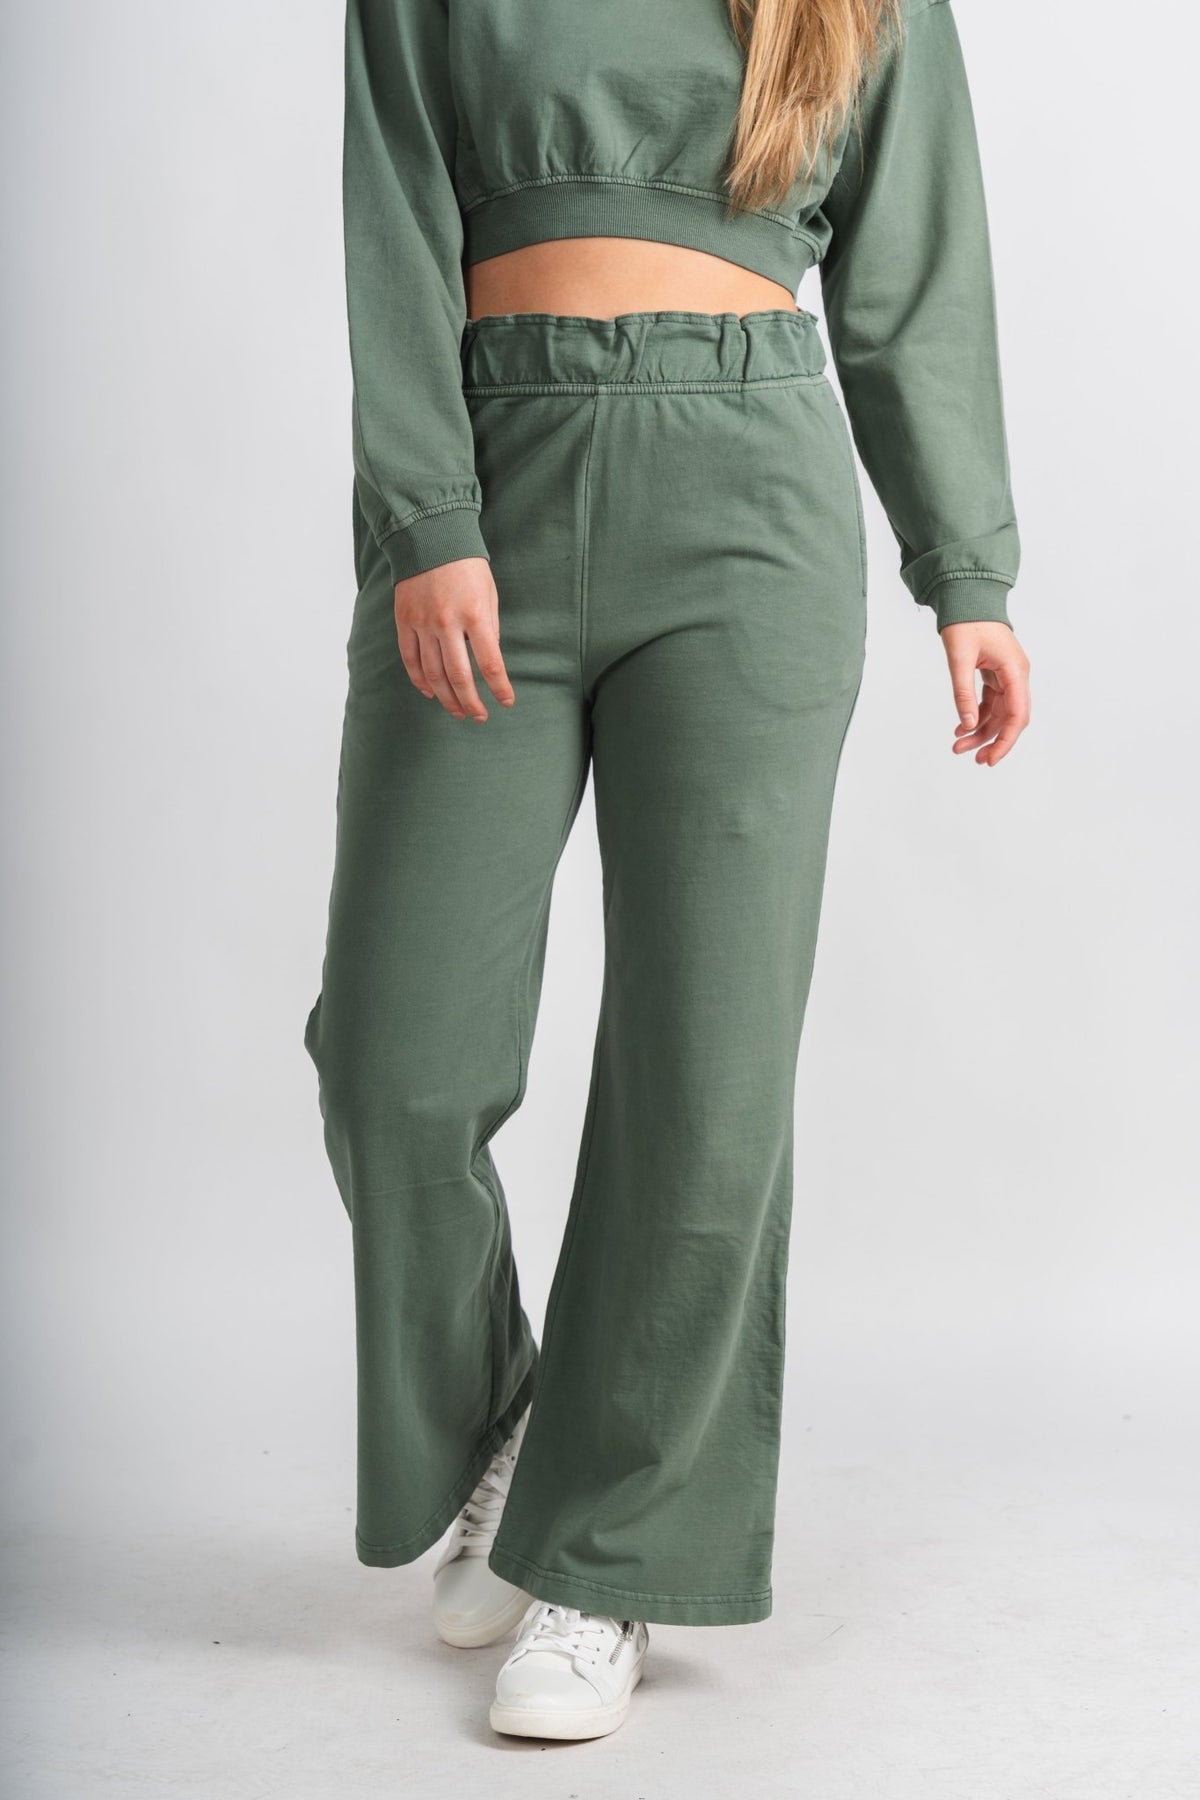 Mineral sweatpants gray green - Trendy Pants - Cute Loungewear Collection at Lush Fashion Lounge Boutique in Oklahoma City